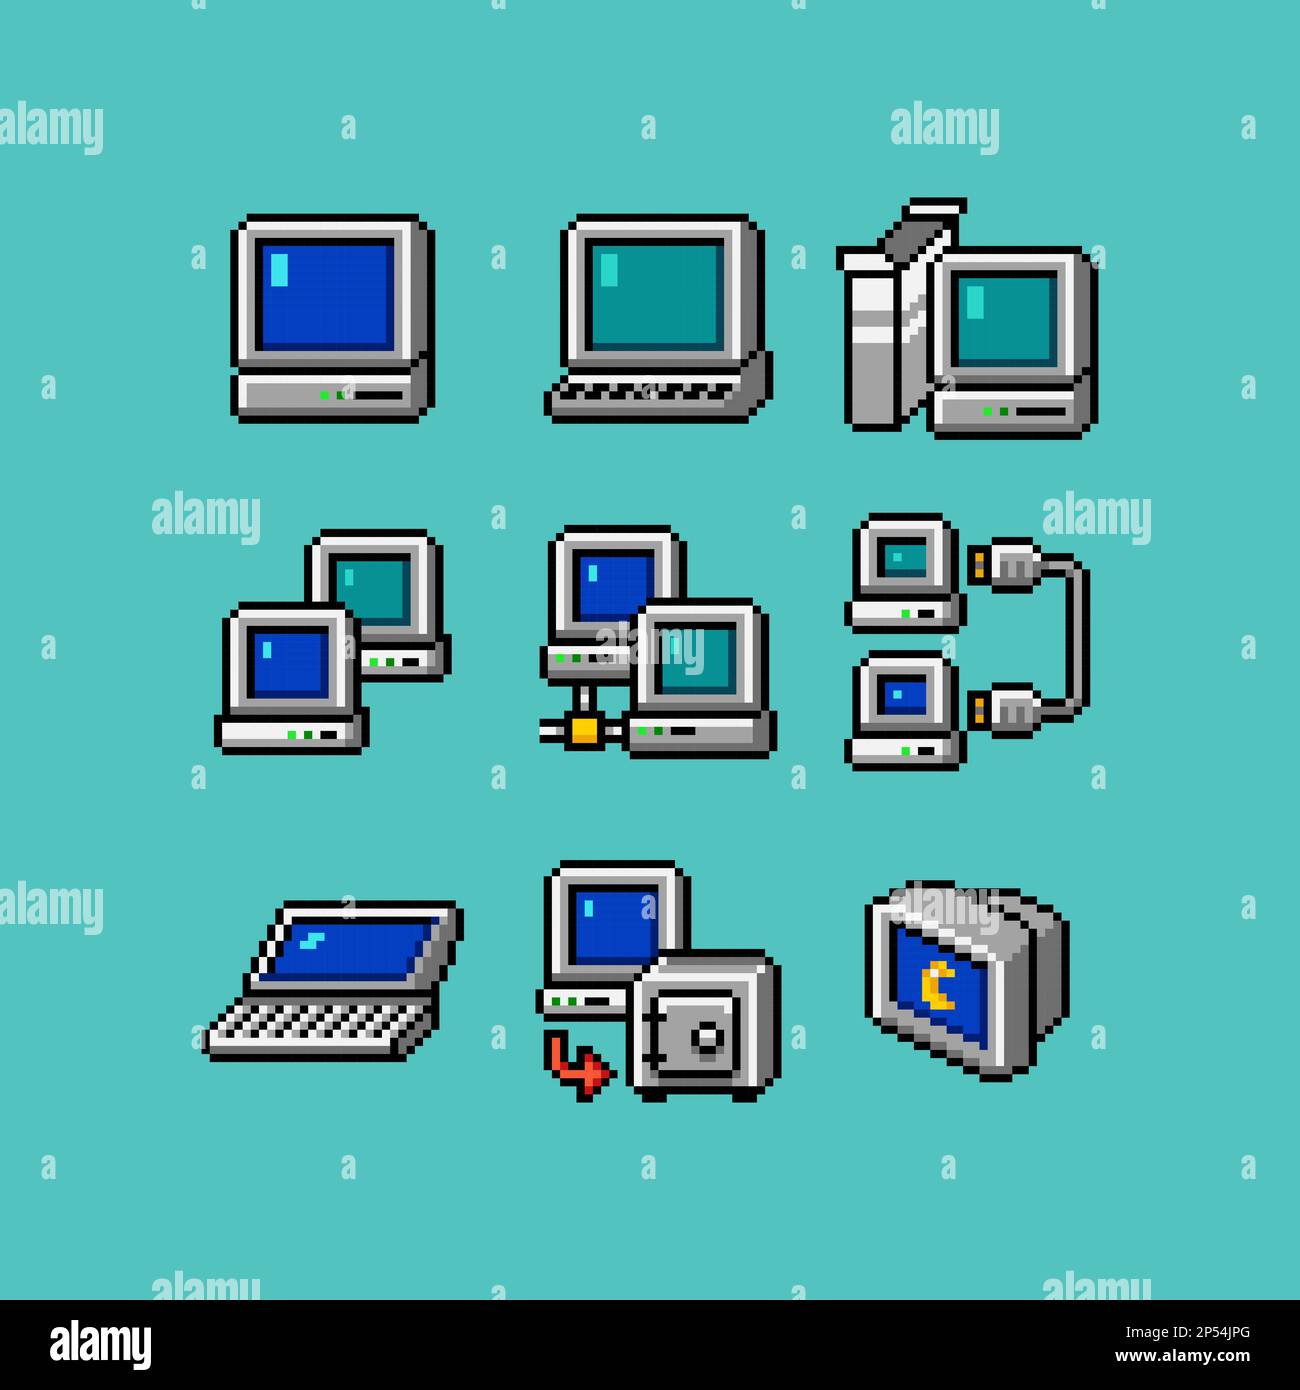 Retro computer interface elements set. Old PC UI icon assets for computer. Display, network, windows, laptop, application program install, storage Stock Vector